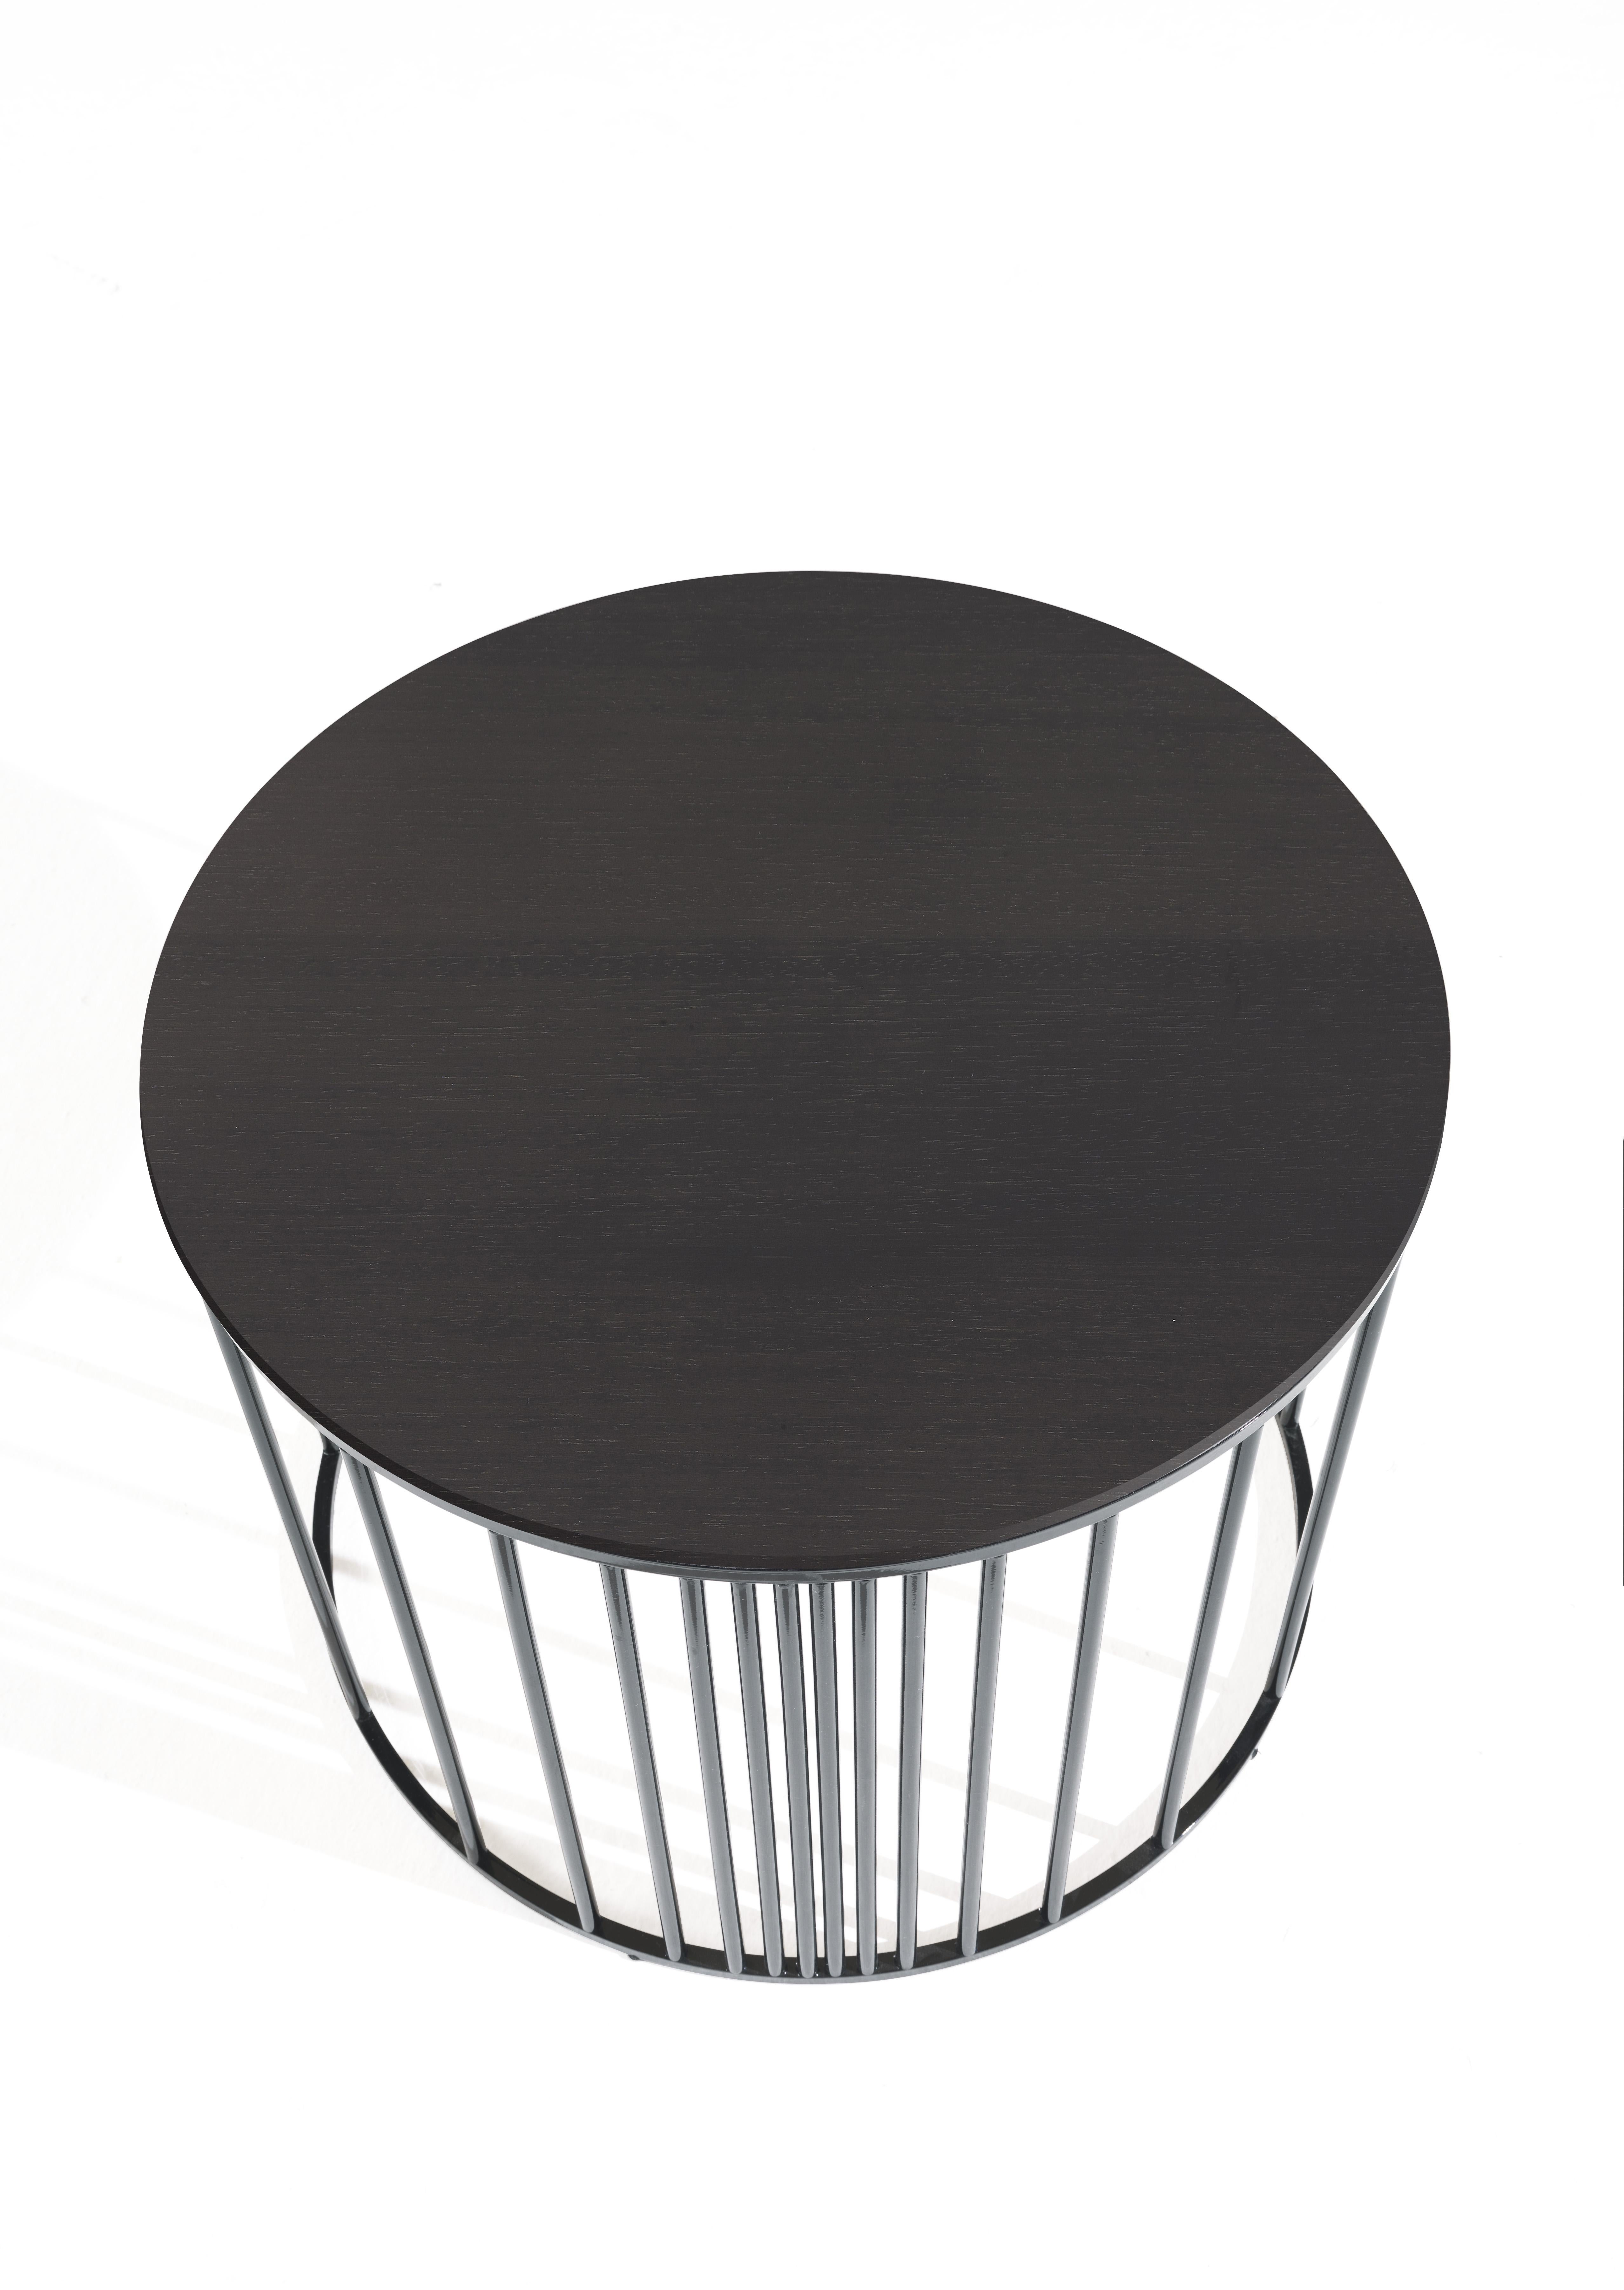 Versatile and eclectic, Doppler small table is characterized by a round top in multilayer wood veneered in Tay Dyed Smokey Grey, supported by a light structure with cylindrical cross-sections with black finishing. Available in different heights and